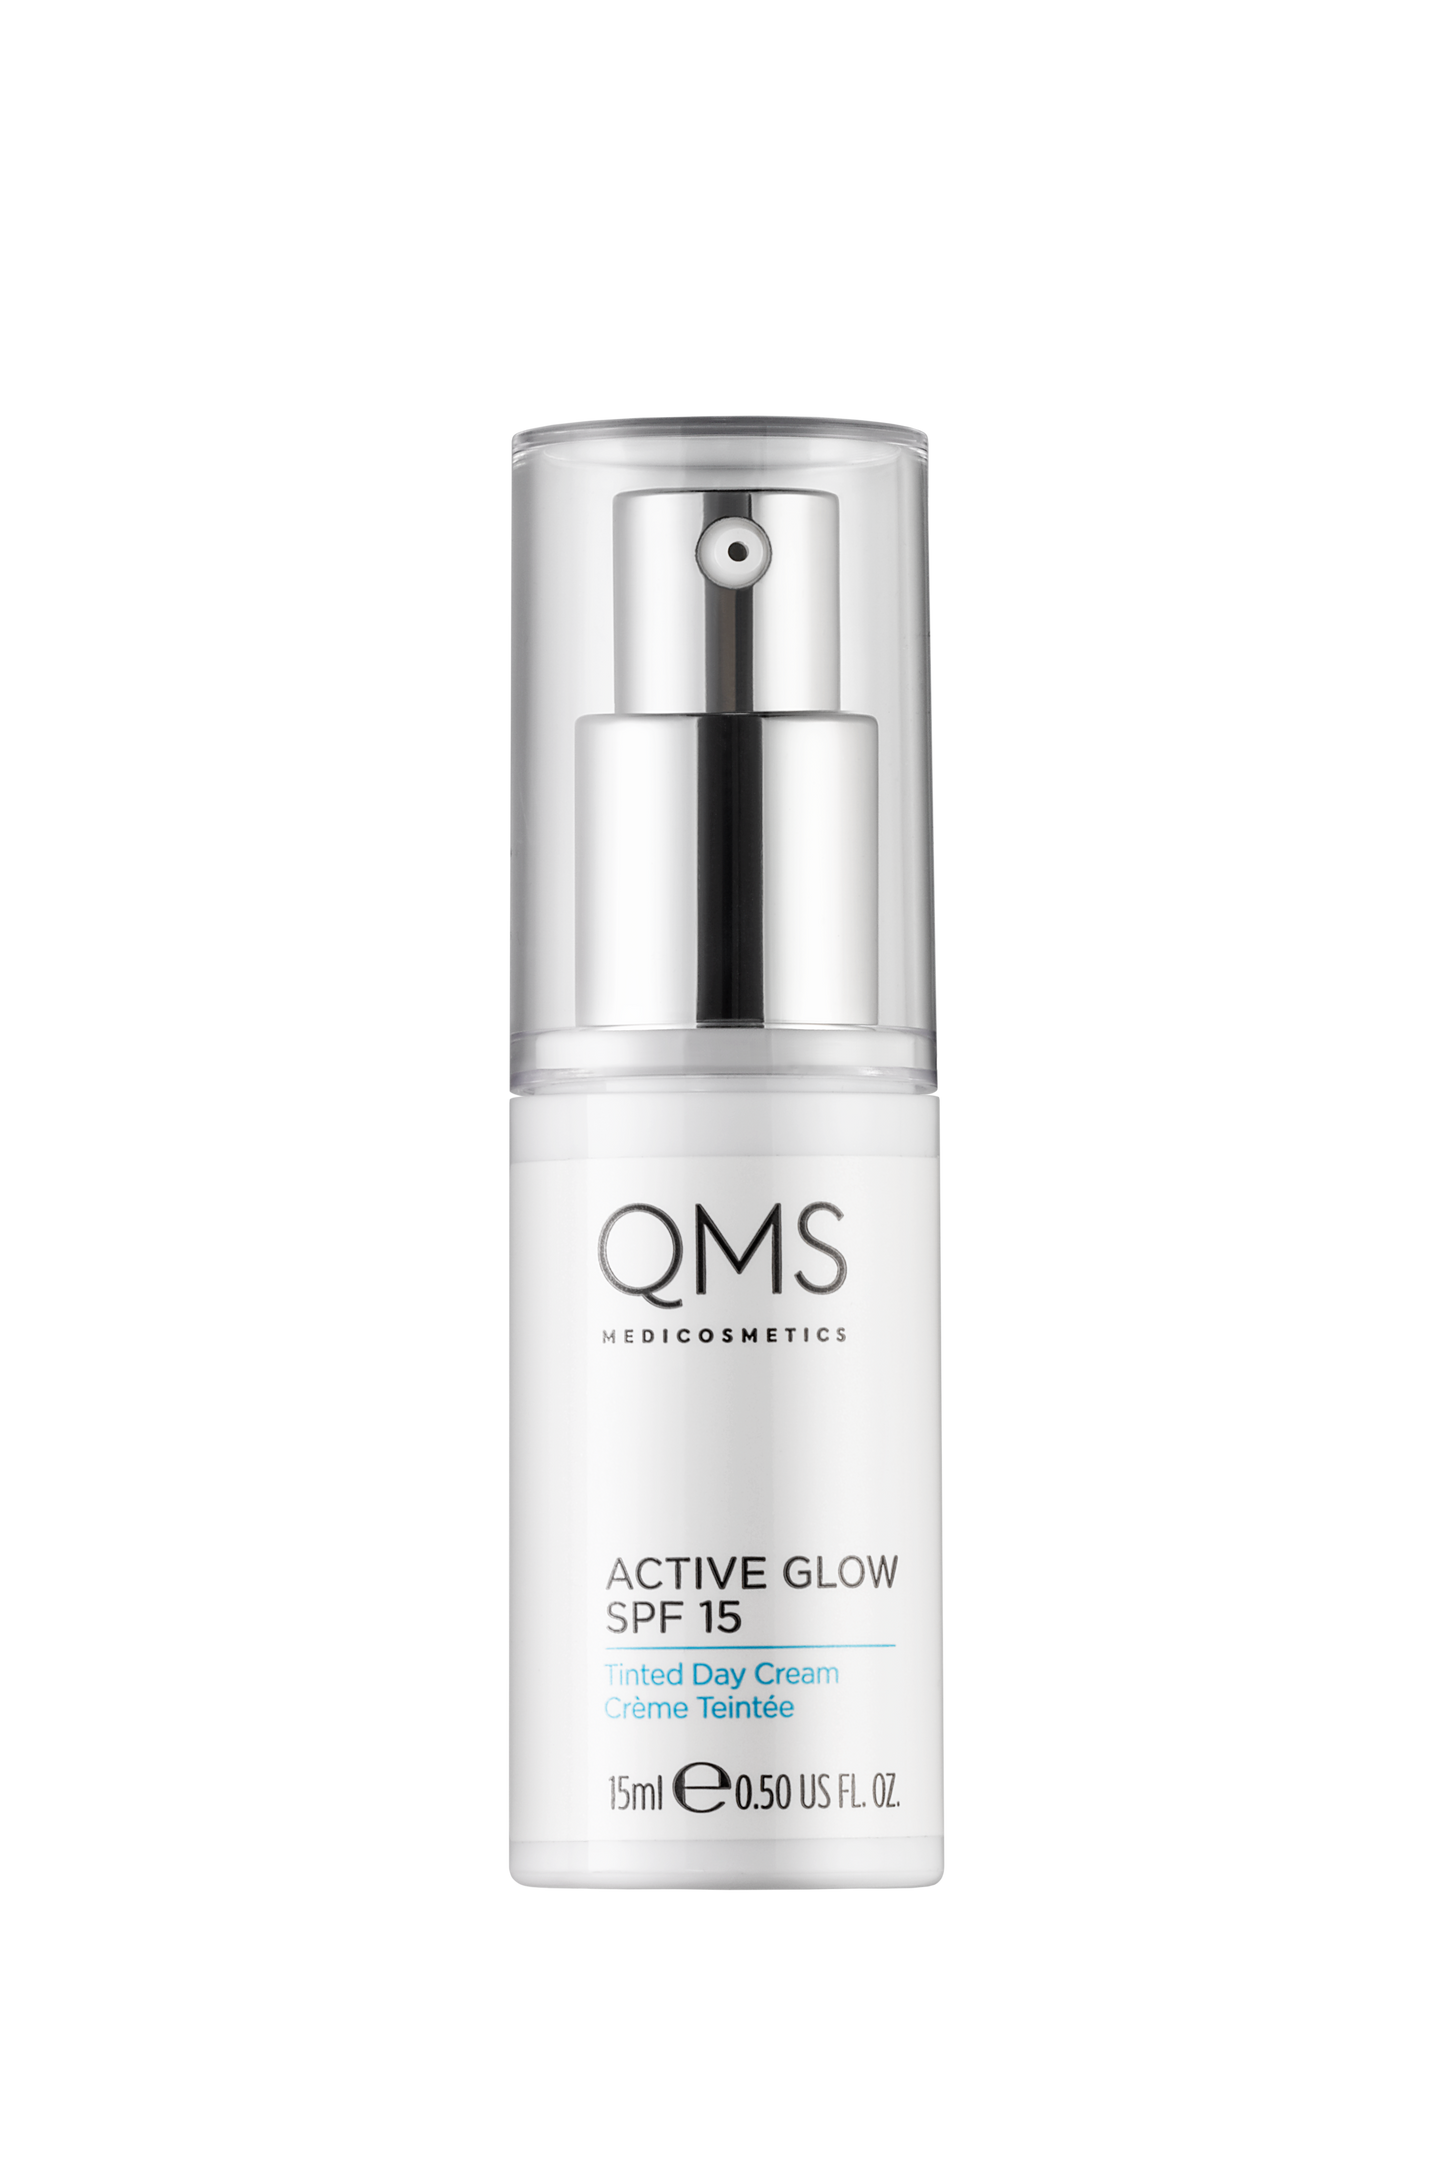 QMS Active Glow SPF 15 Tinted Day Cream 15 ml (discover size)